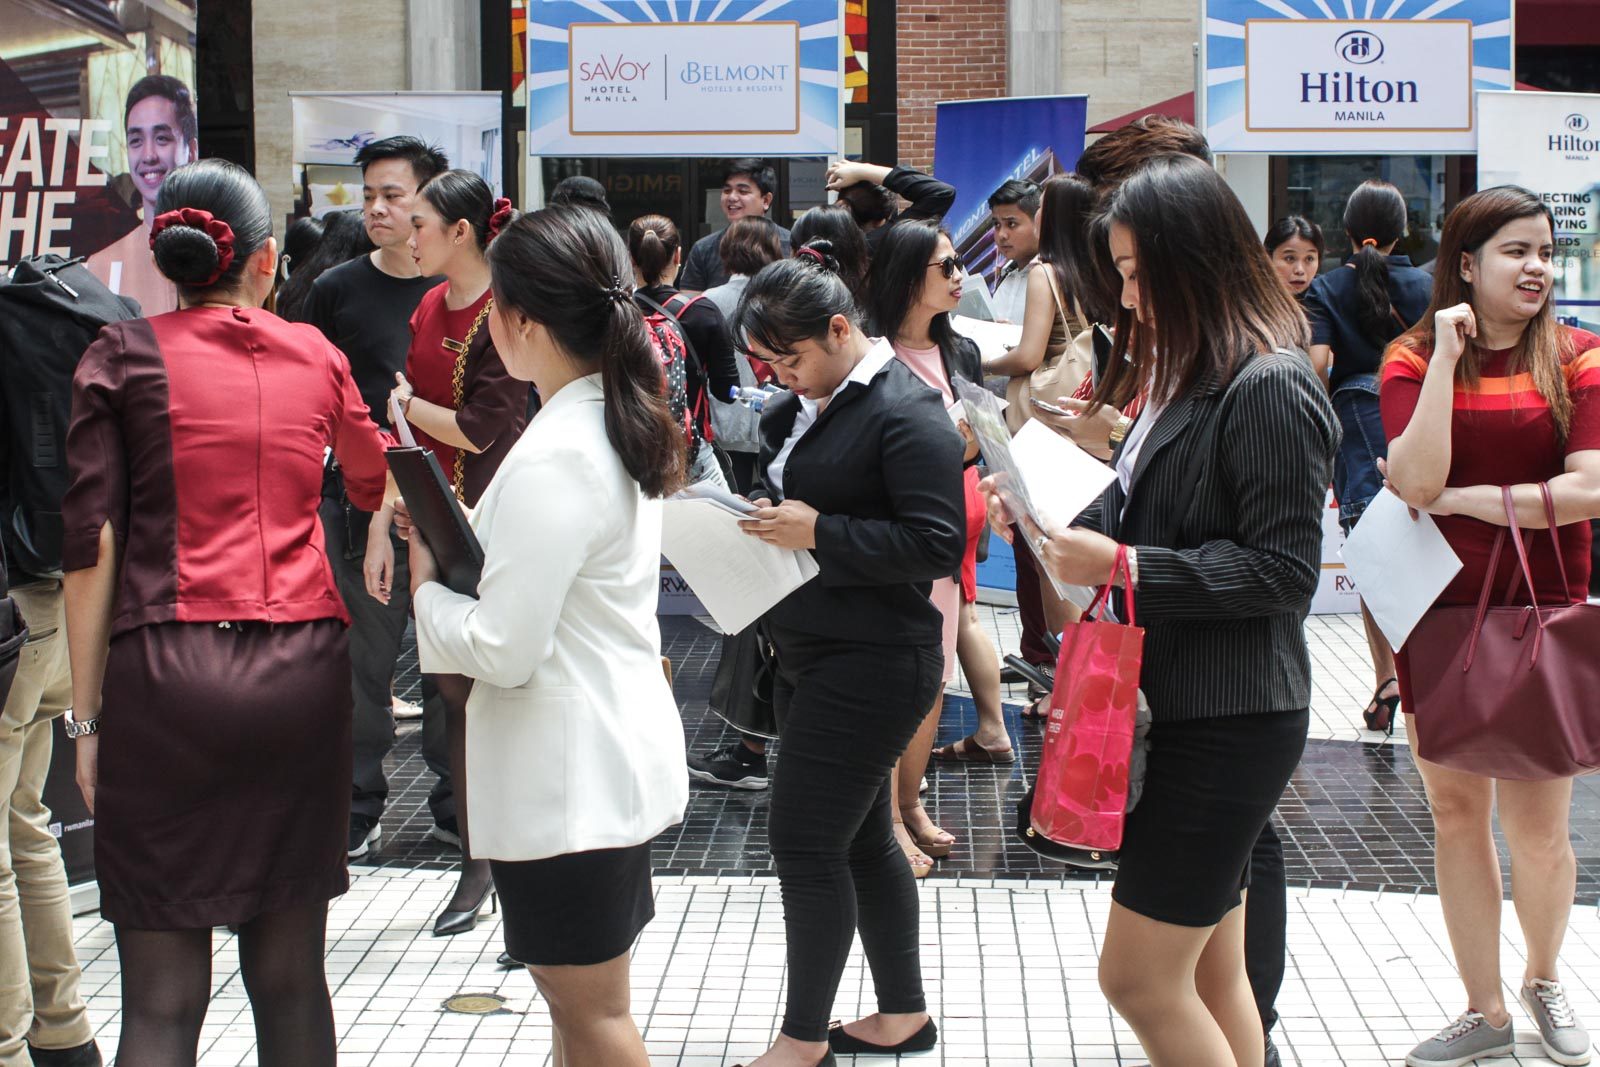 New law waives gov’t document fees for first-time job seekers